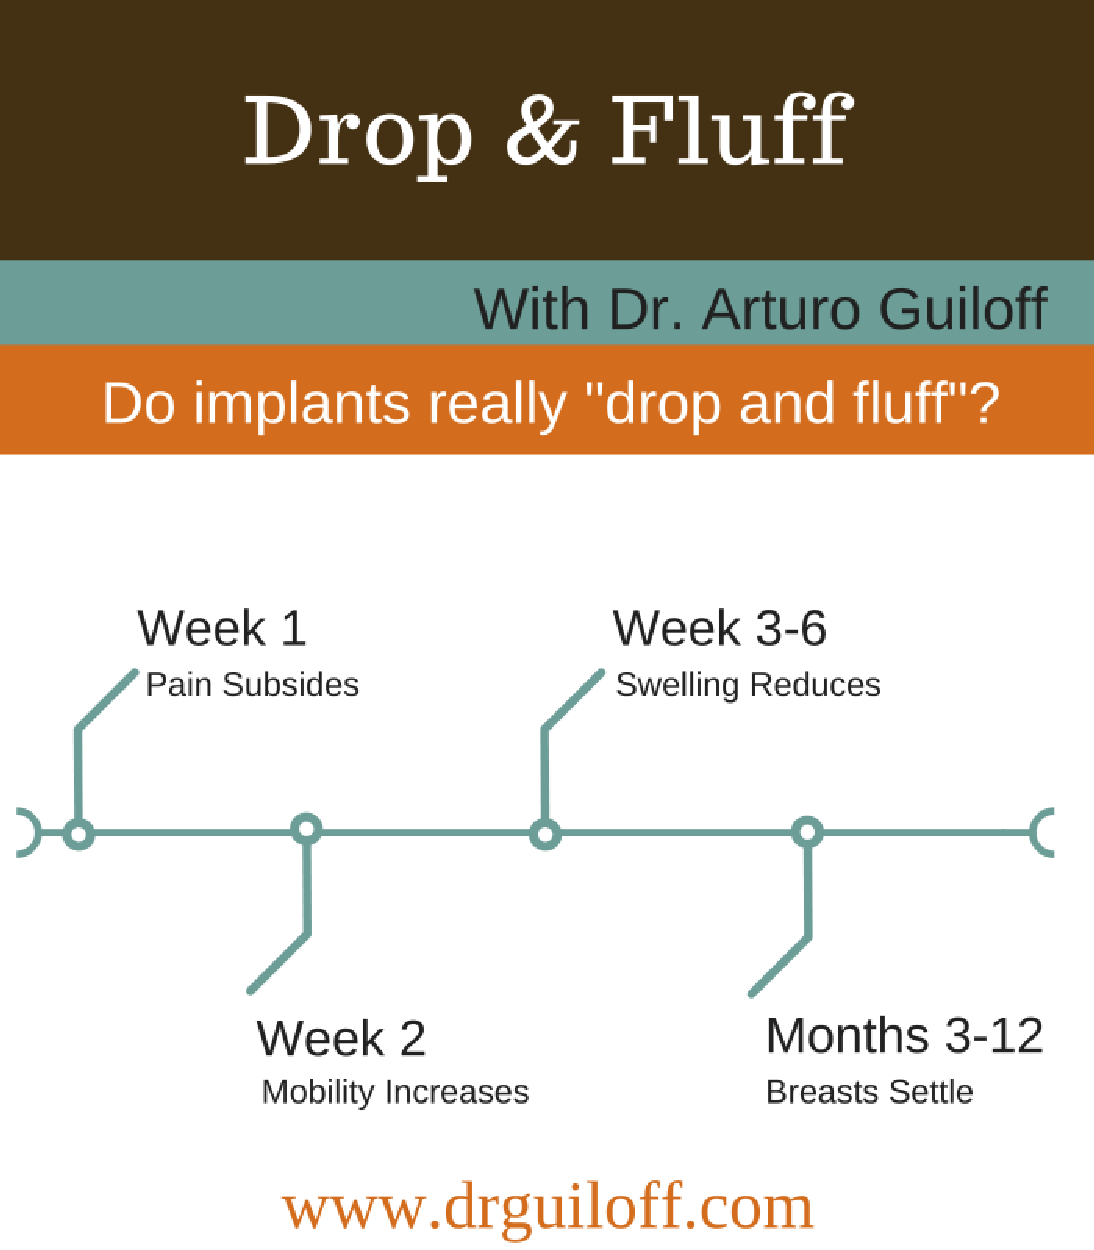 http://www.drguiloff.com/hubfs/Cosmetic%20Confidence%20Corner/When%20do%20Implants%20Drop%20and%20Fluff%20Breast%20Augmentation.png#keepProtocol